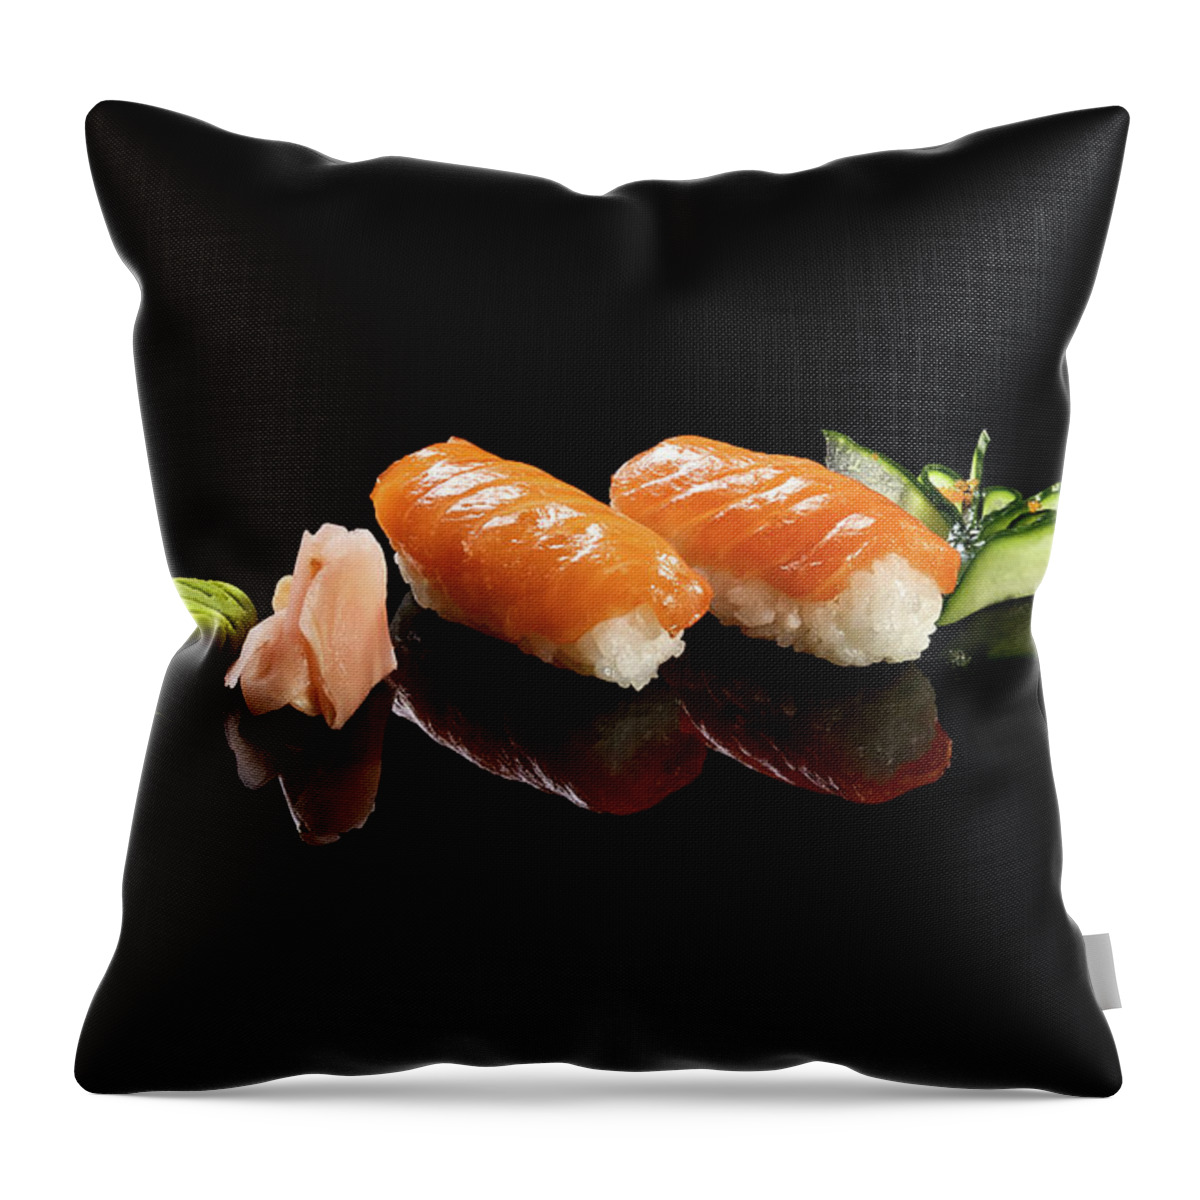 Wasabi Throw Pillow featuring the photograph Nigiri Sushi Style by The lycan